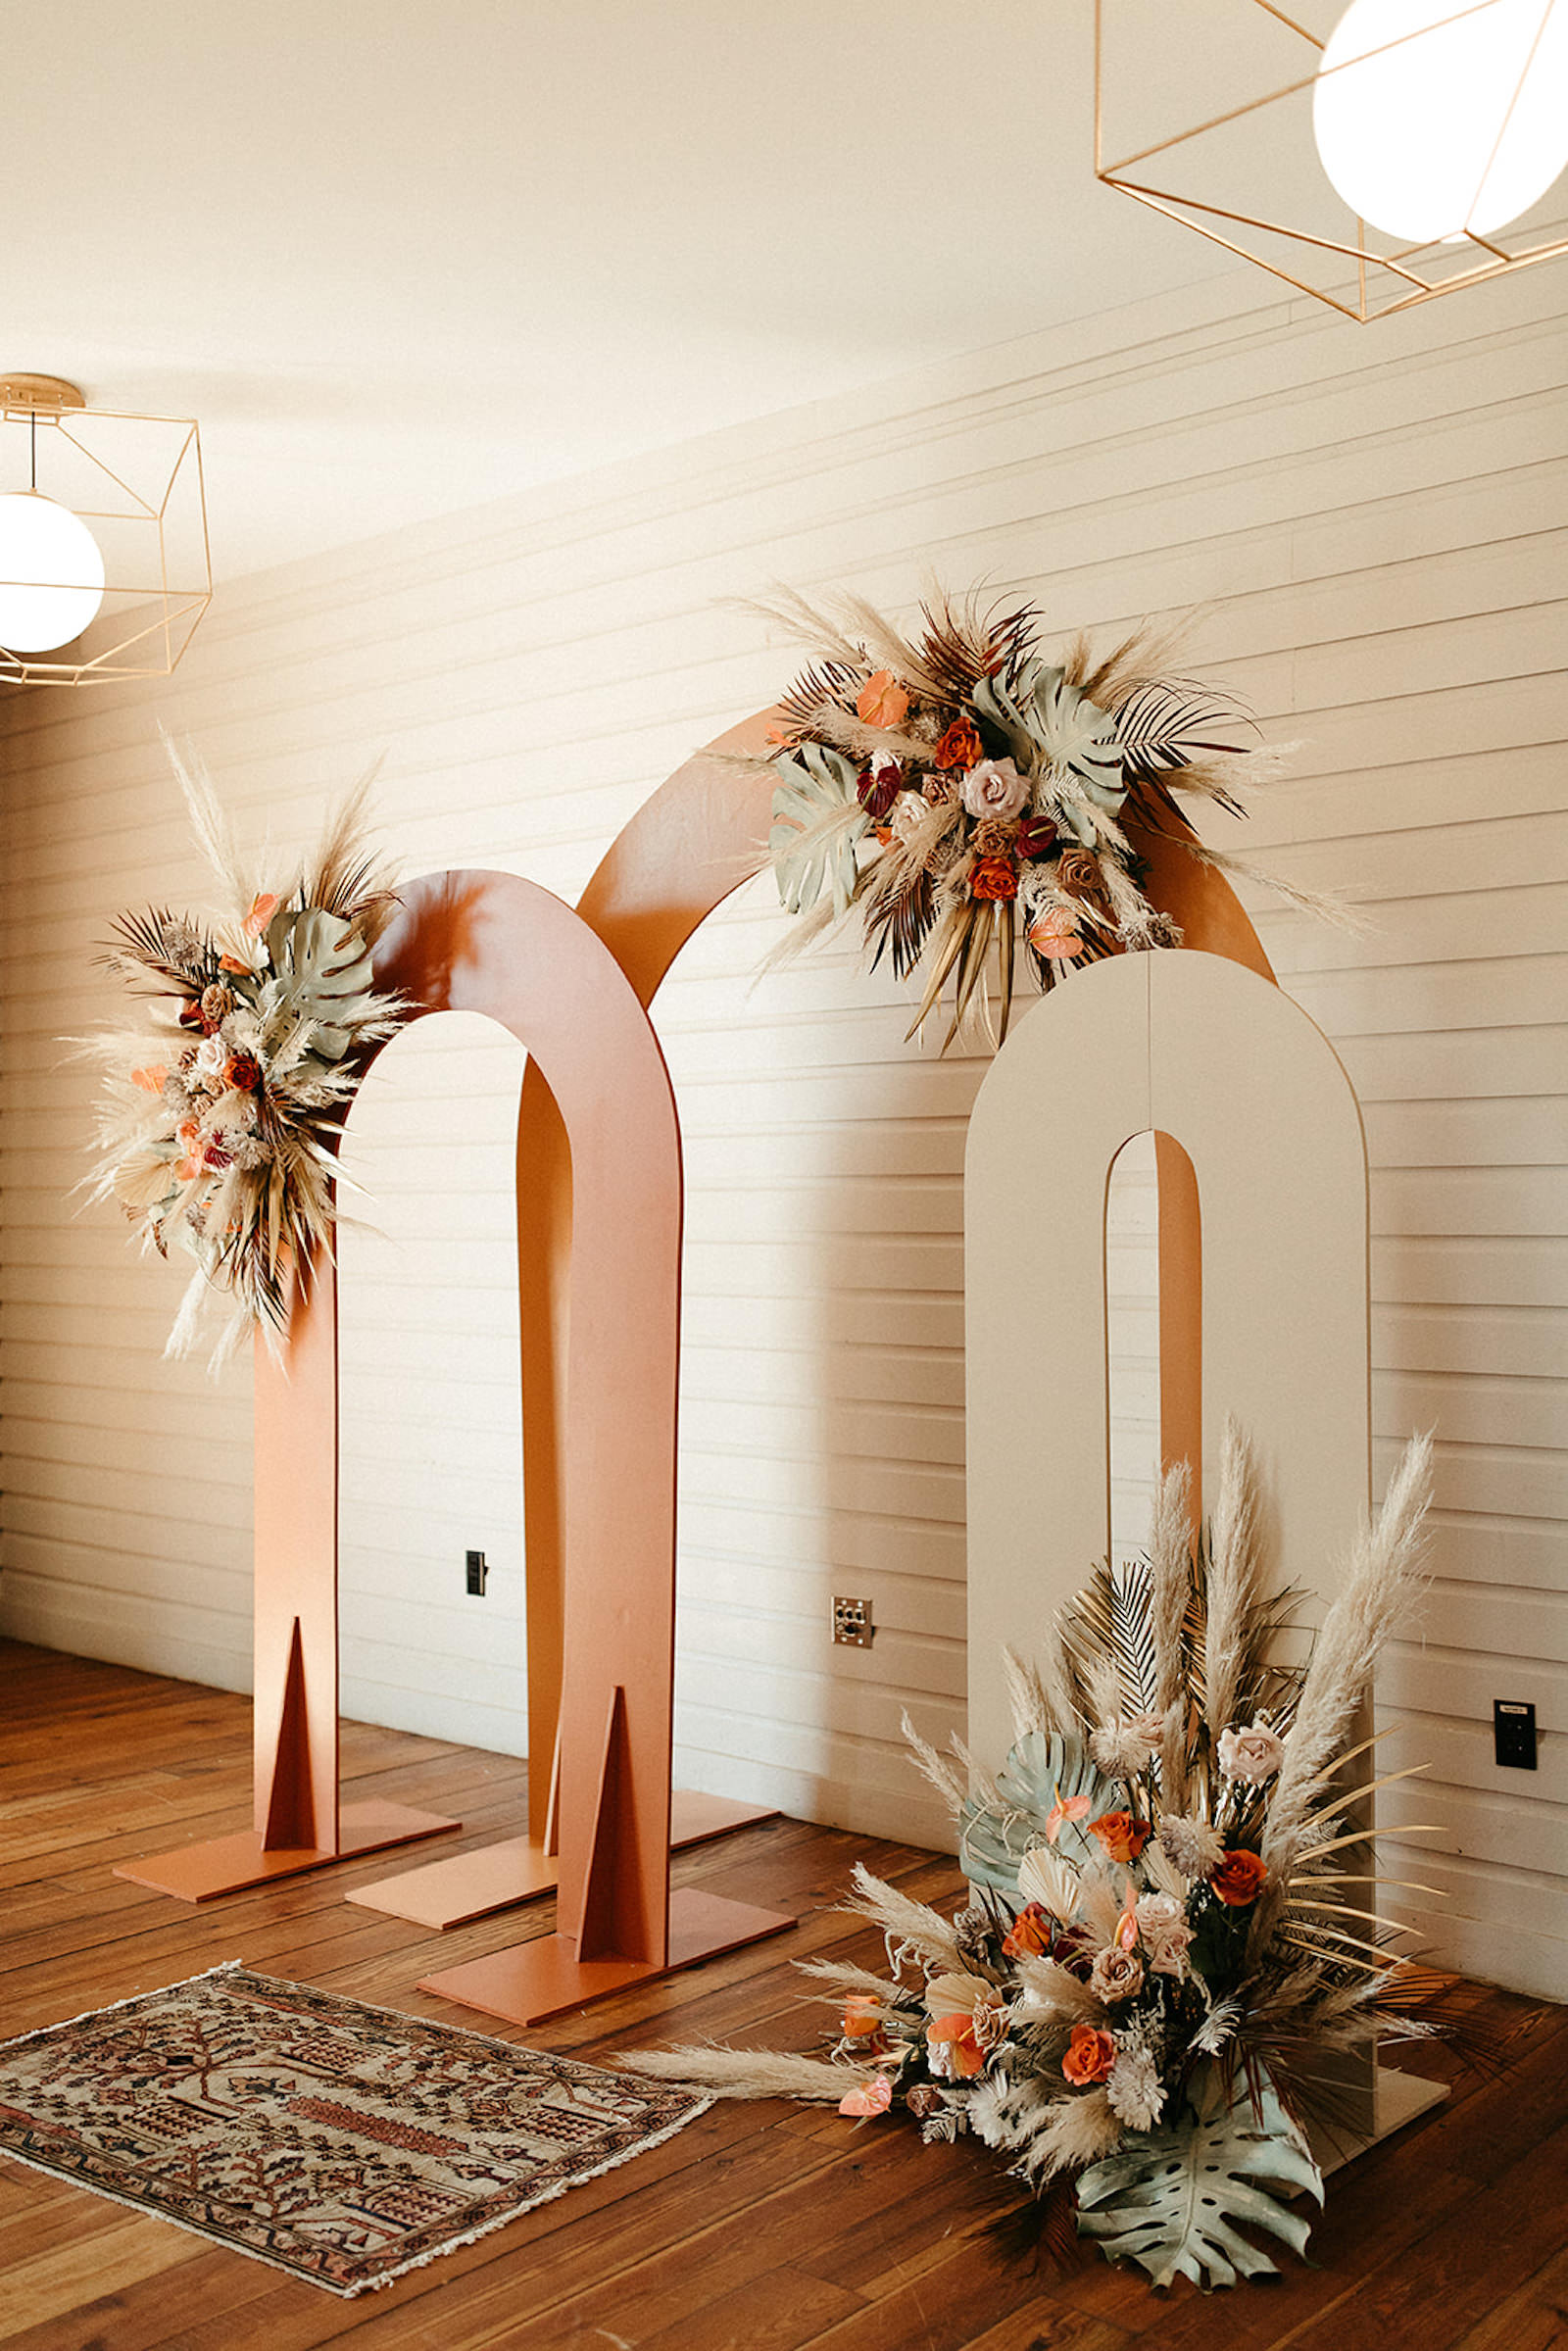 Earthy Neutral Boho Modern Chic Wedding Ceremony Decor, Arched Terracotta and Cream Panels with Lush Floral Bouquets | Tampa Bay Wedding Florist Save the Date Florist | Wedding Planner Wilder Mind Events